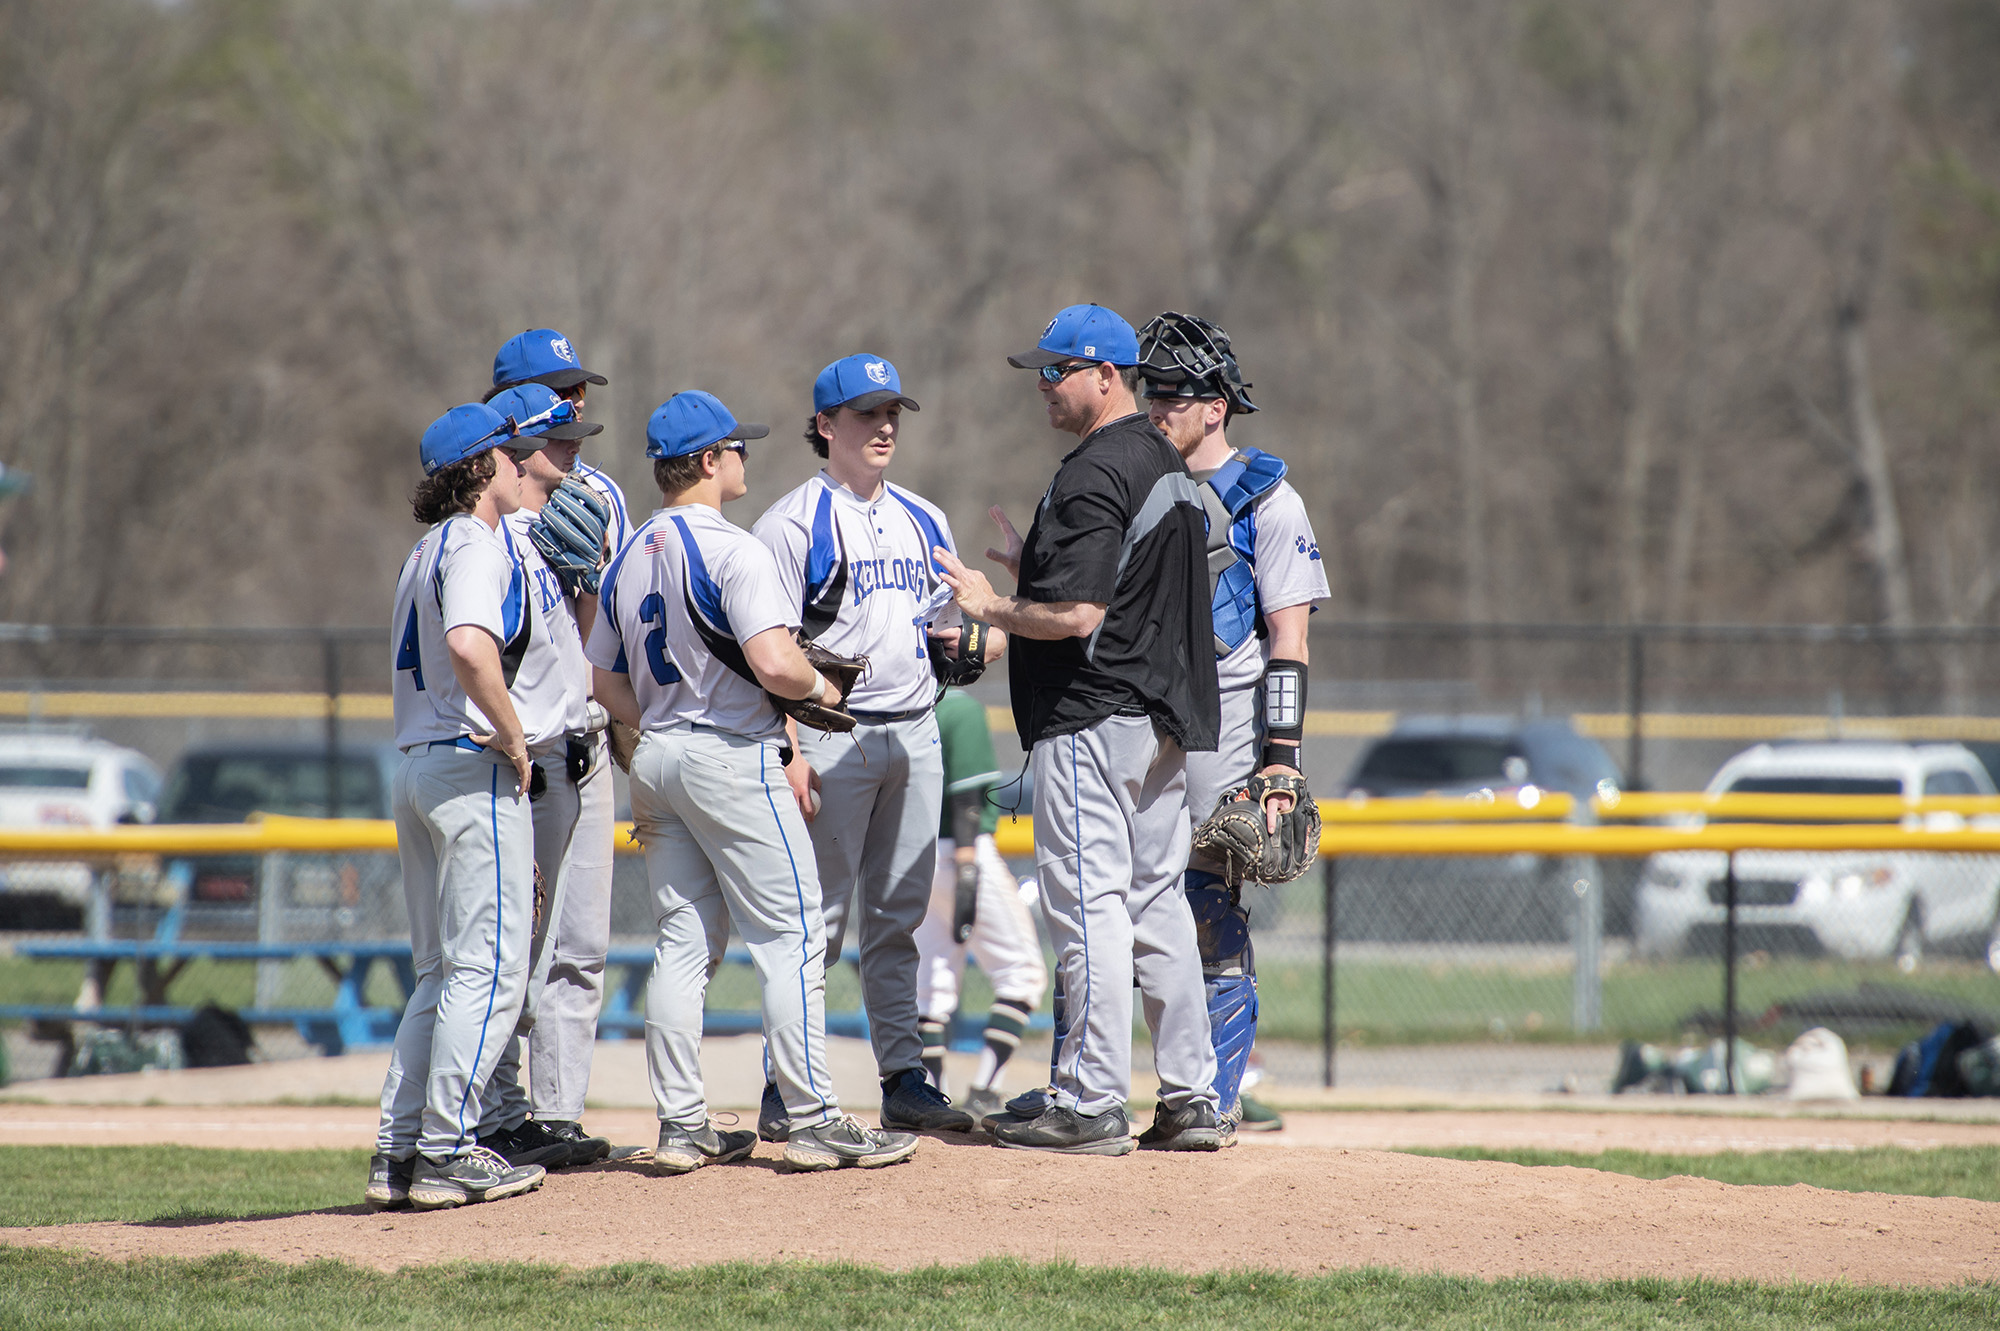 Coach Laskovy meets with players on the pitcher's mound during a game.